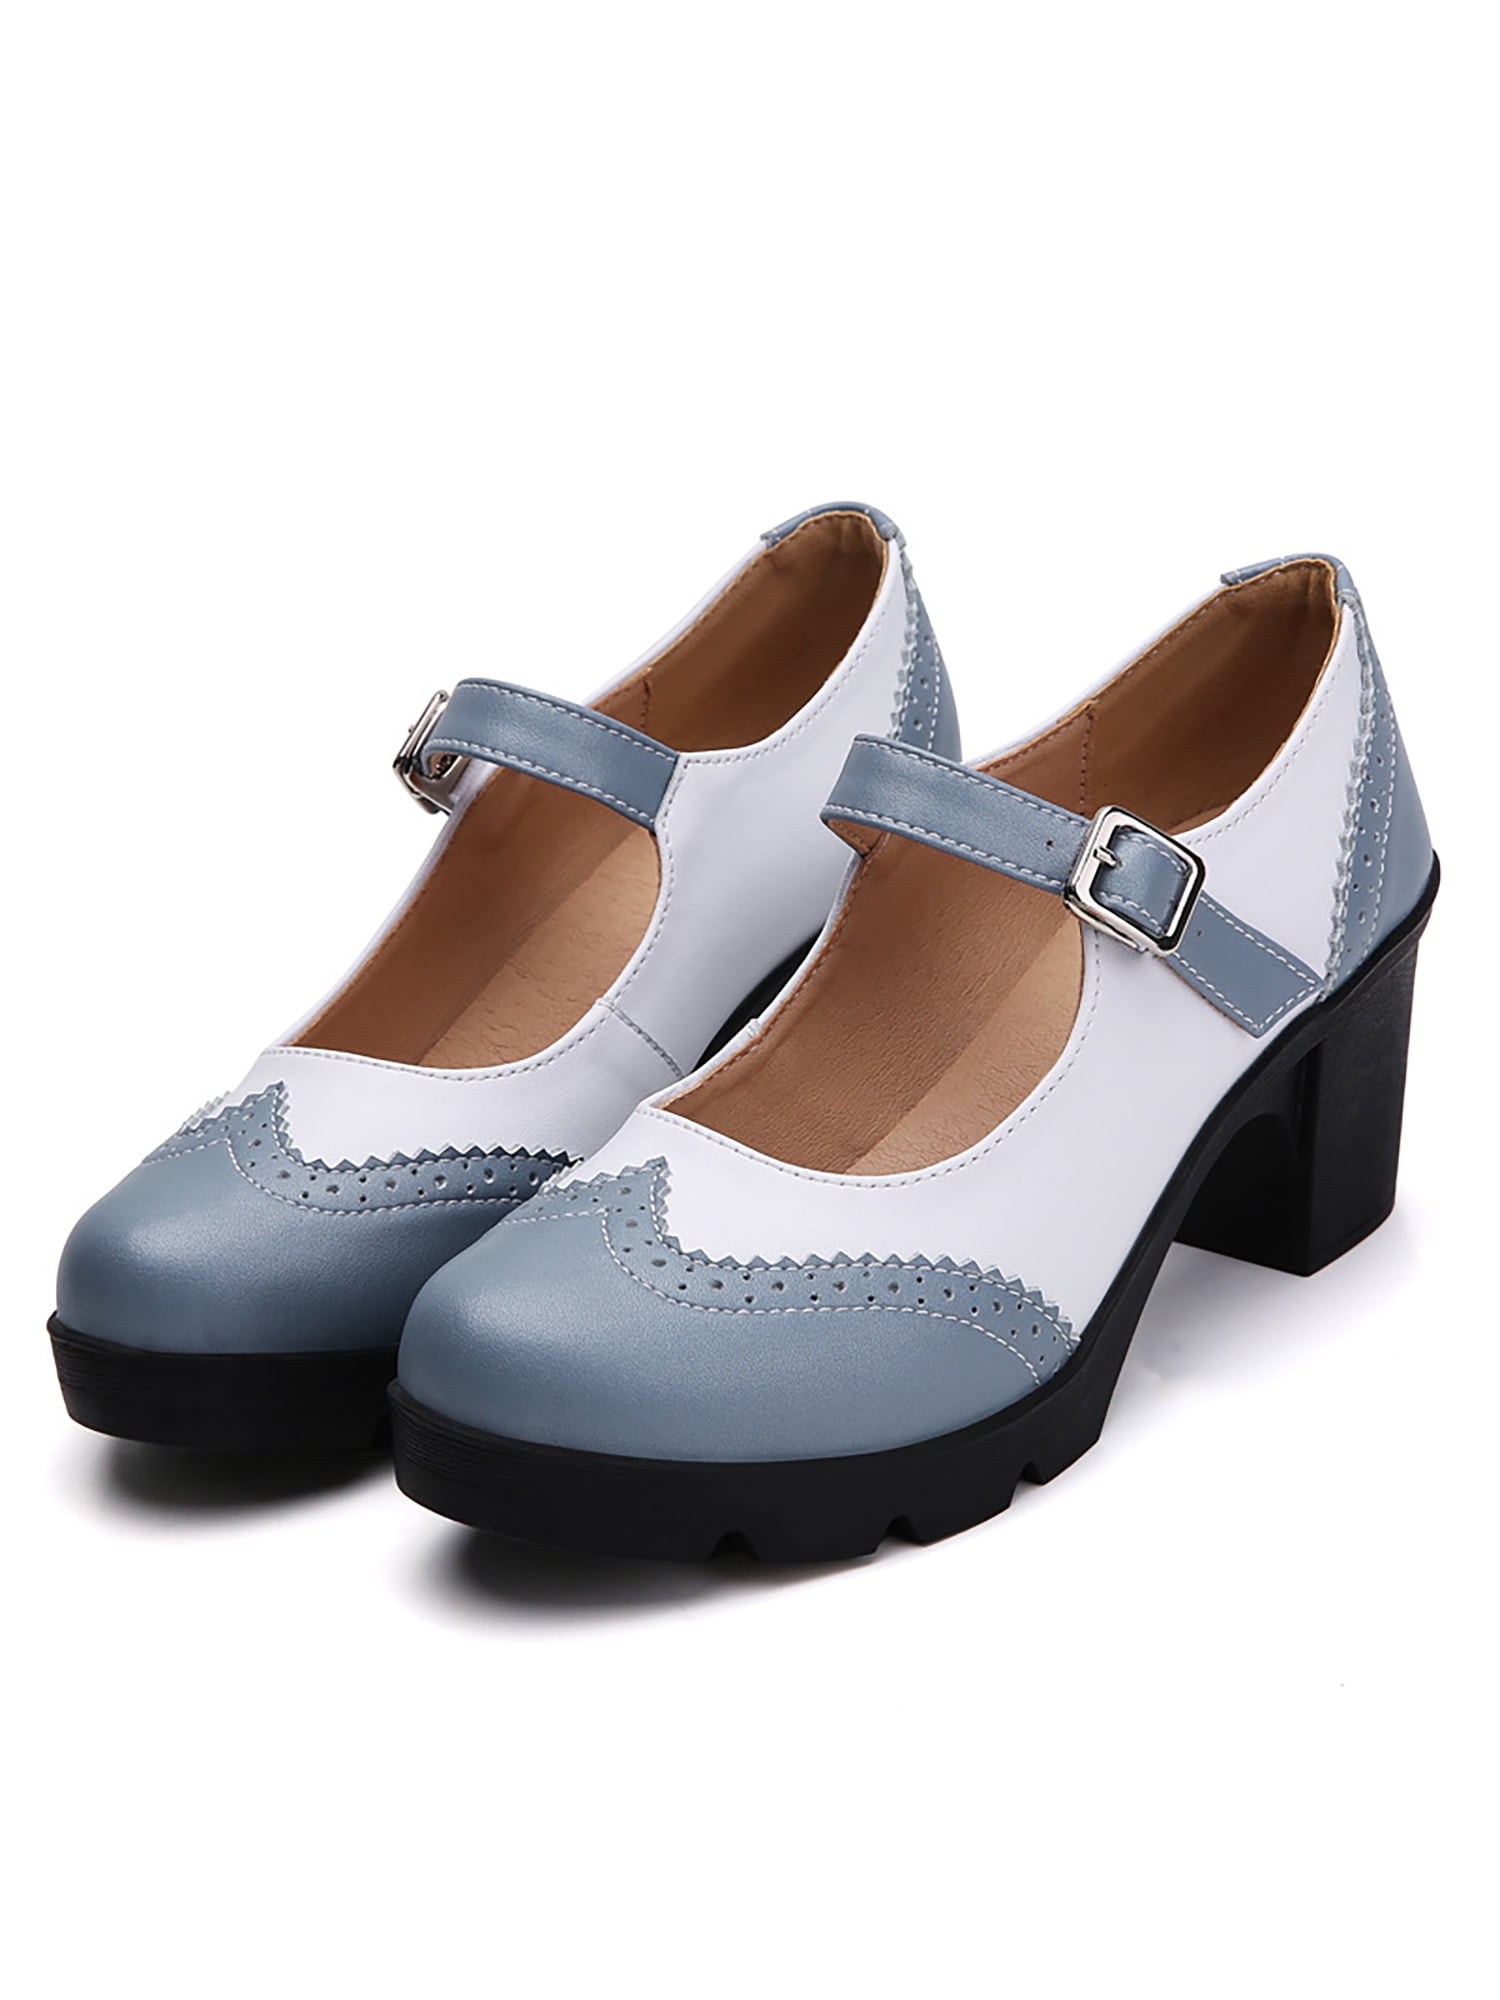 Details about   Ladies Flat Heel Round Toe Buckle Strap Lolita Cosplay Pumps Mary Janes Shoes B 